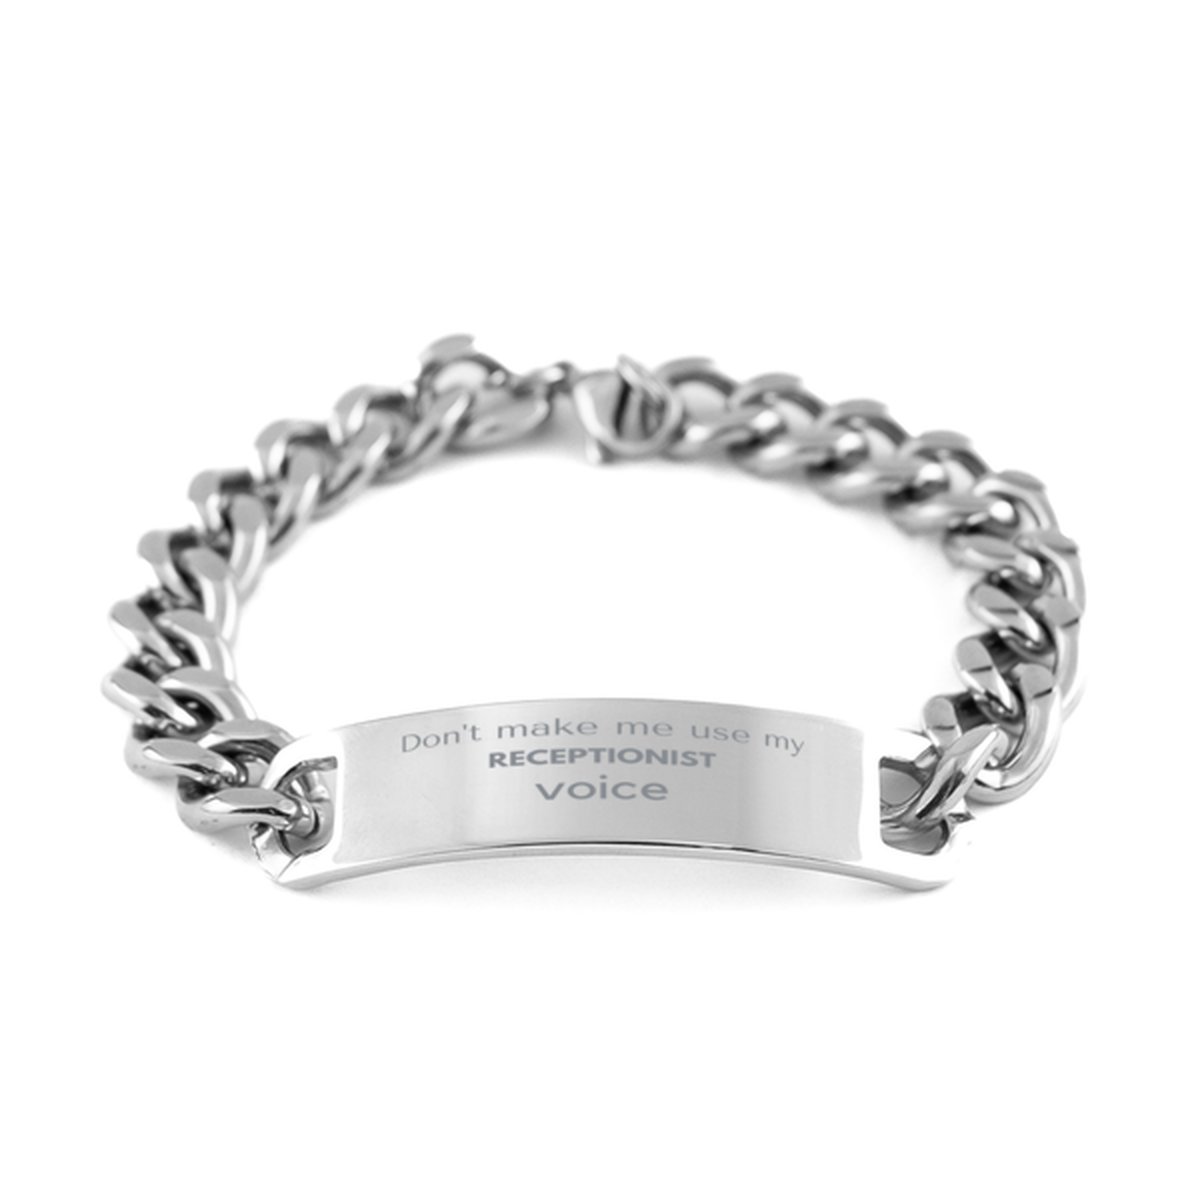 Don't make me use my Receptionist voice, Sarcasm Receptionist Gifts, Christmas Receptionist Cuban Chain Stainless Steel Bracelet Birthday Unique Gifts For Receptionist Coworkers, Men, Women, Colleague, Friends